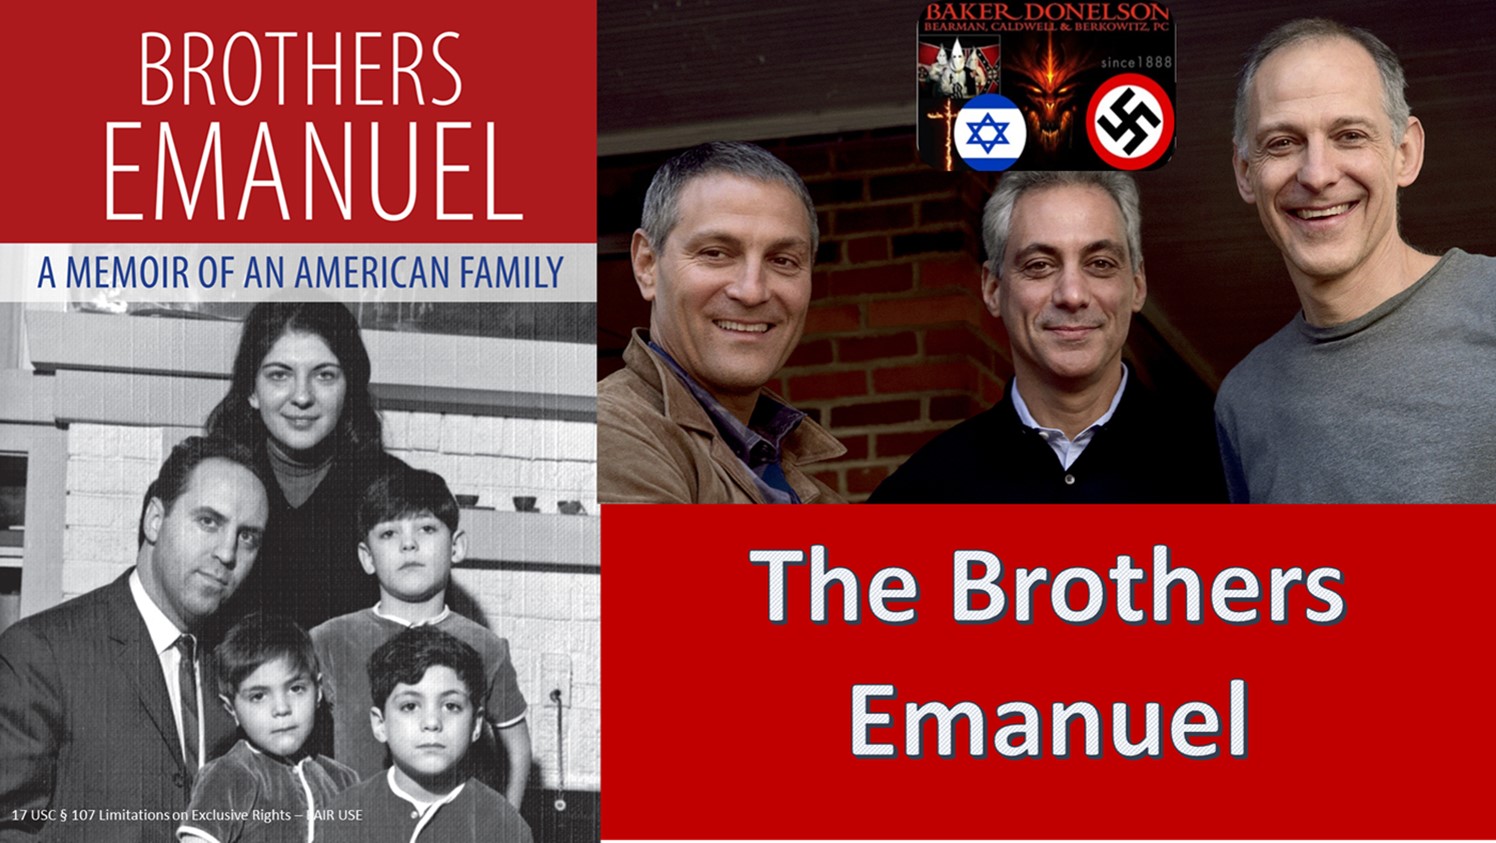 The Brothers Emanuel The New York Times 022612